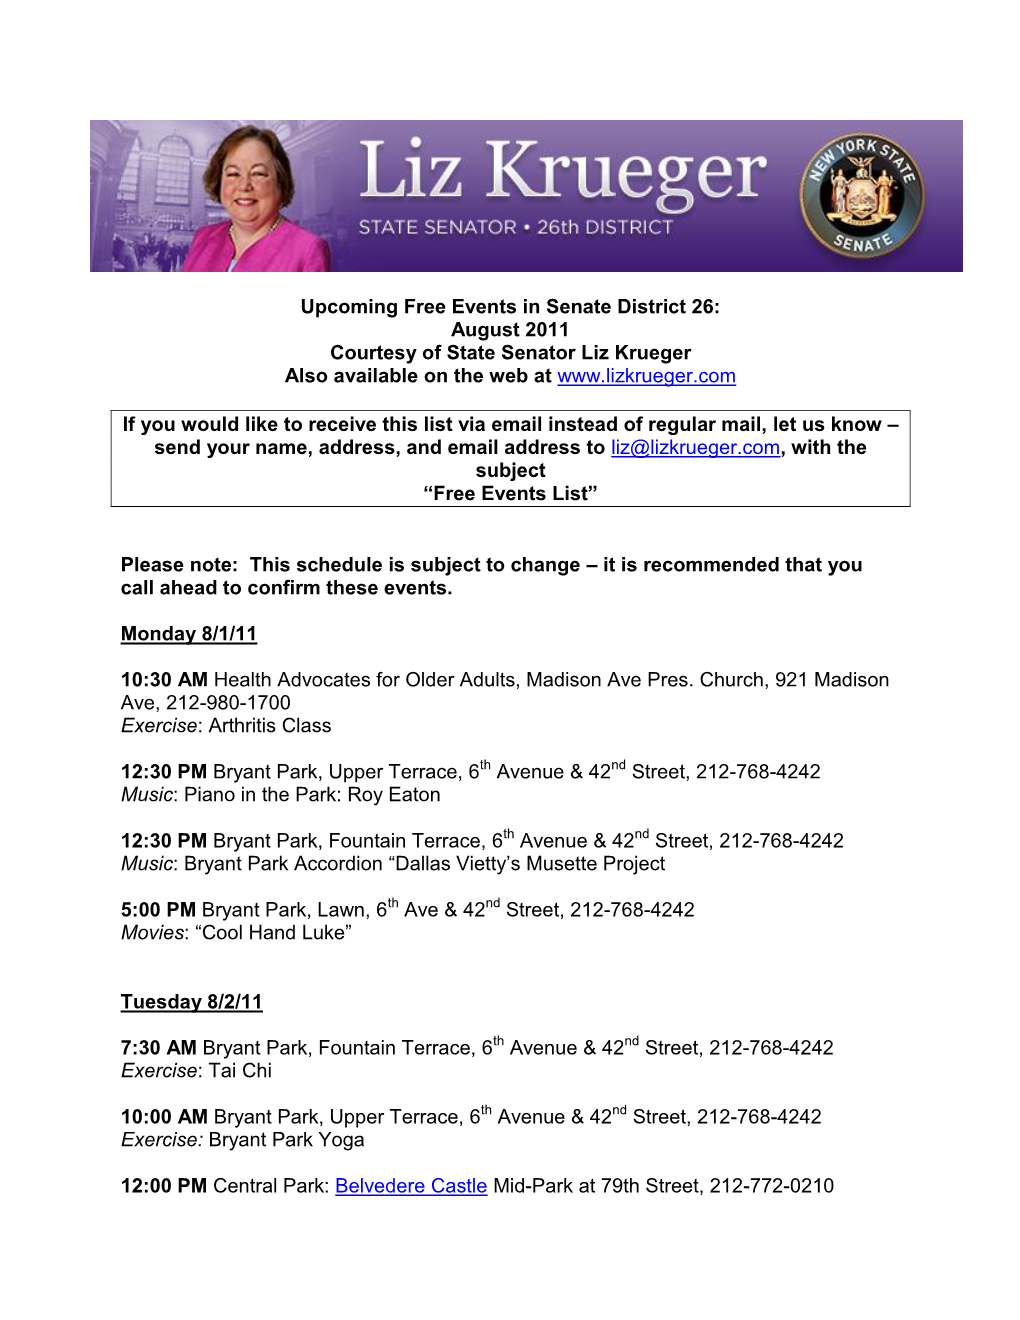 Upcoming Free Events in Senate District 26: August 2011 Courtesy of State Senator Liz Krueger Also Available on the Web At